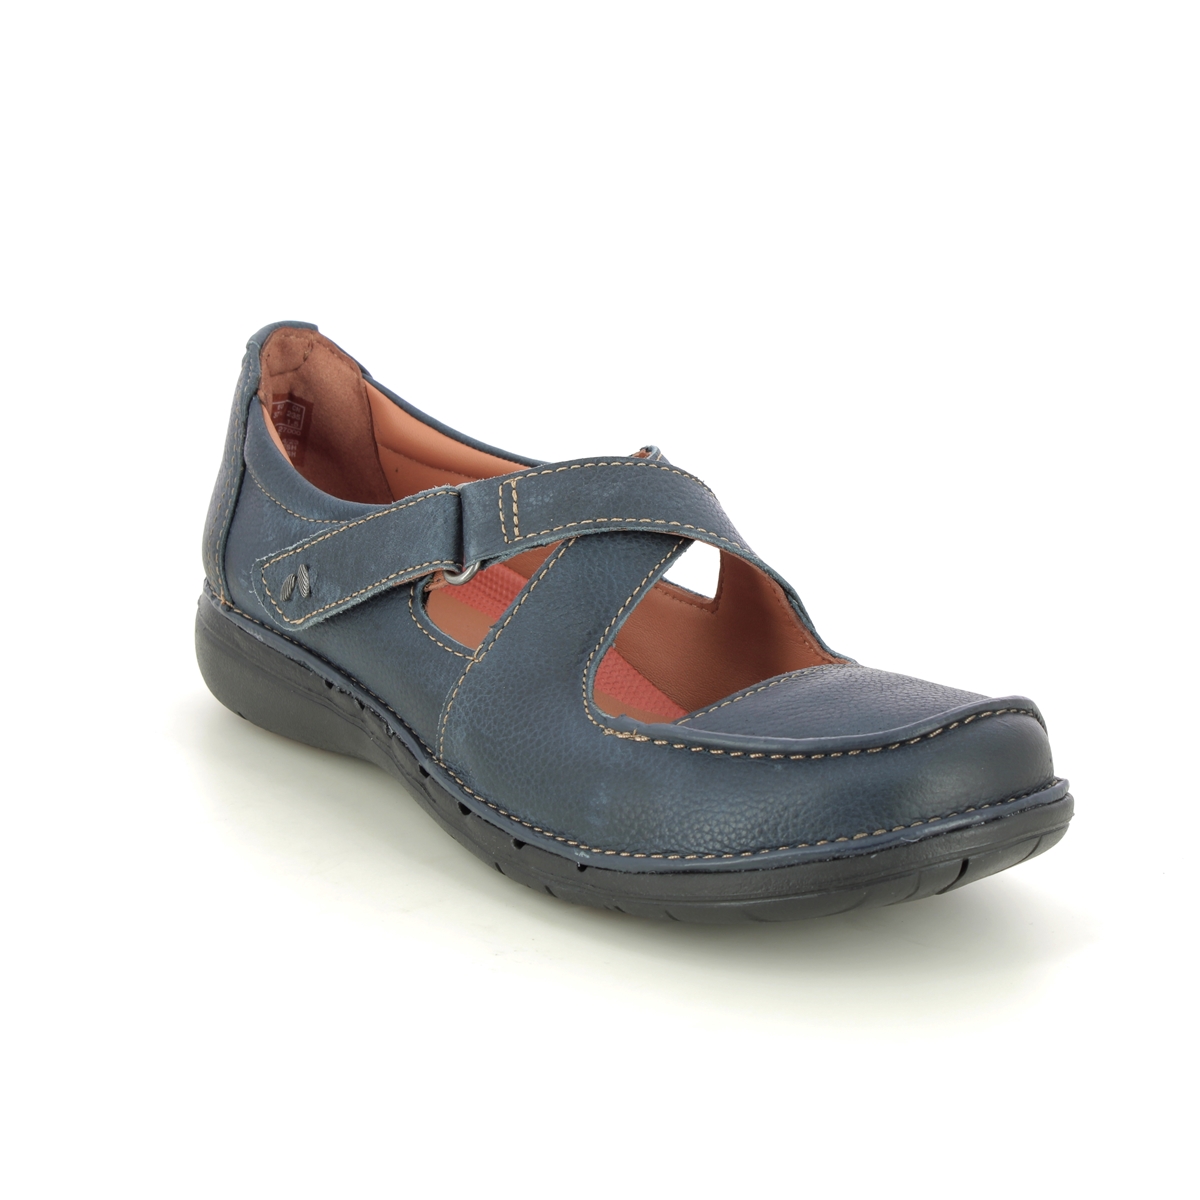 Clarks Un Loop Strap Navy Leather Womens Mary Jane Shoes 749724D In Size 6.5 In Plain Navy Leather